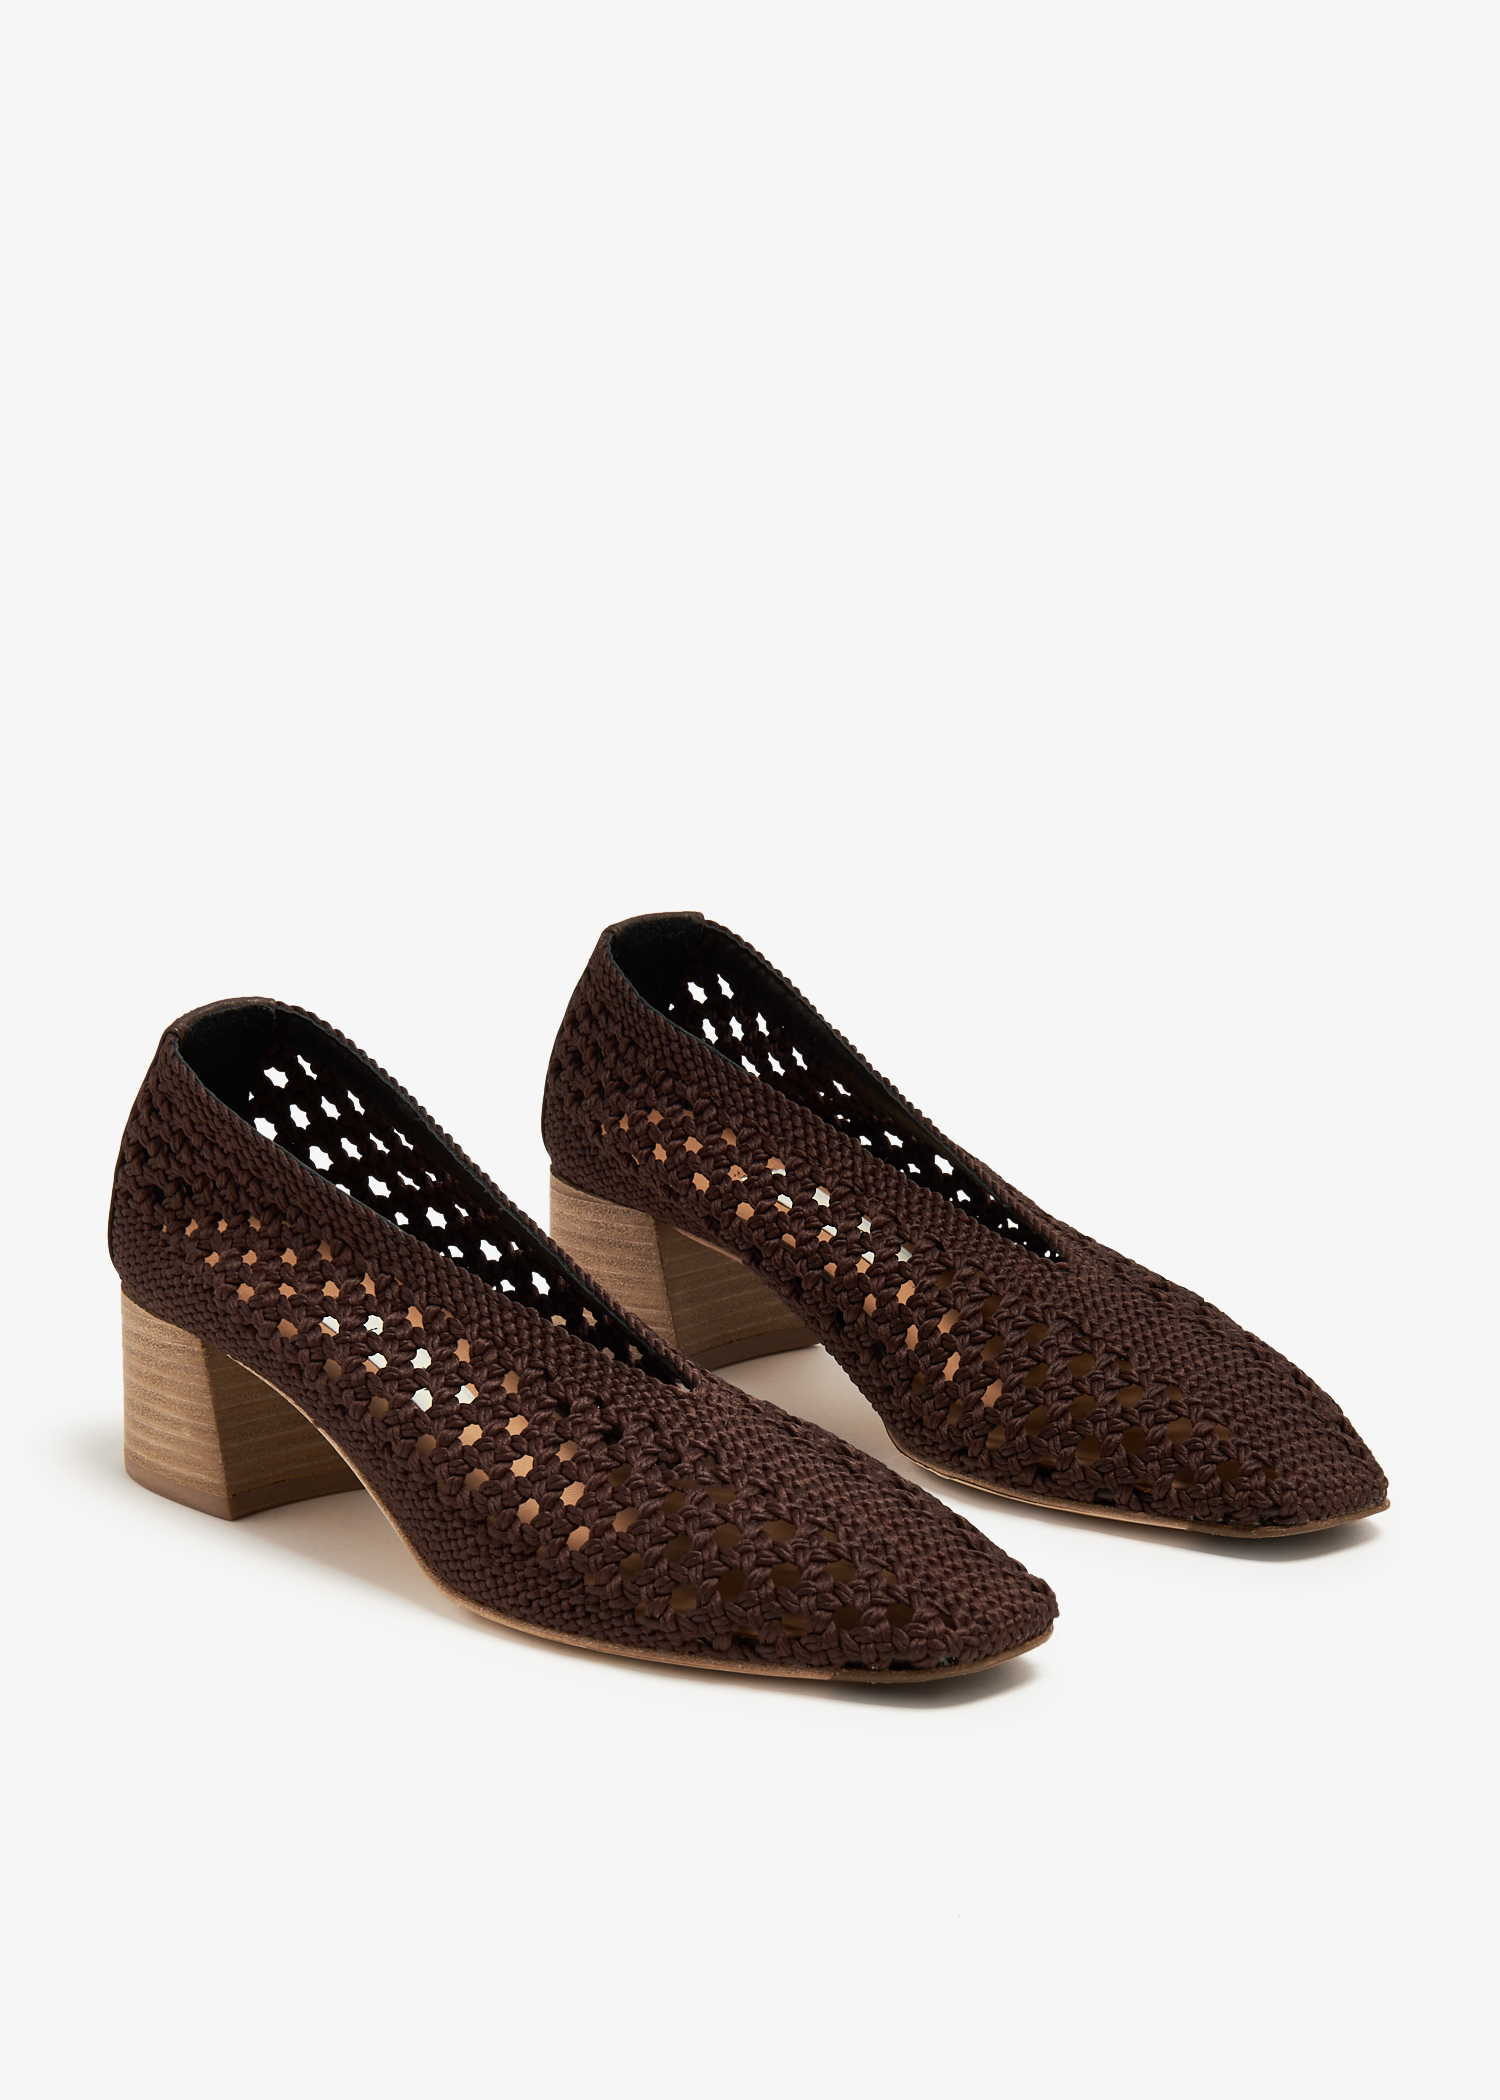 Miista Taissa Courts pumps for Women - Brown in UAE | Level Shoes